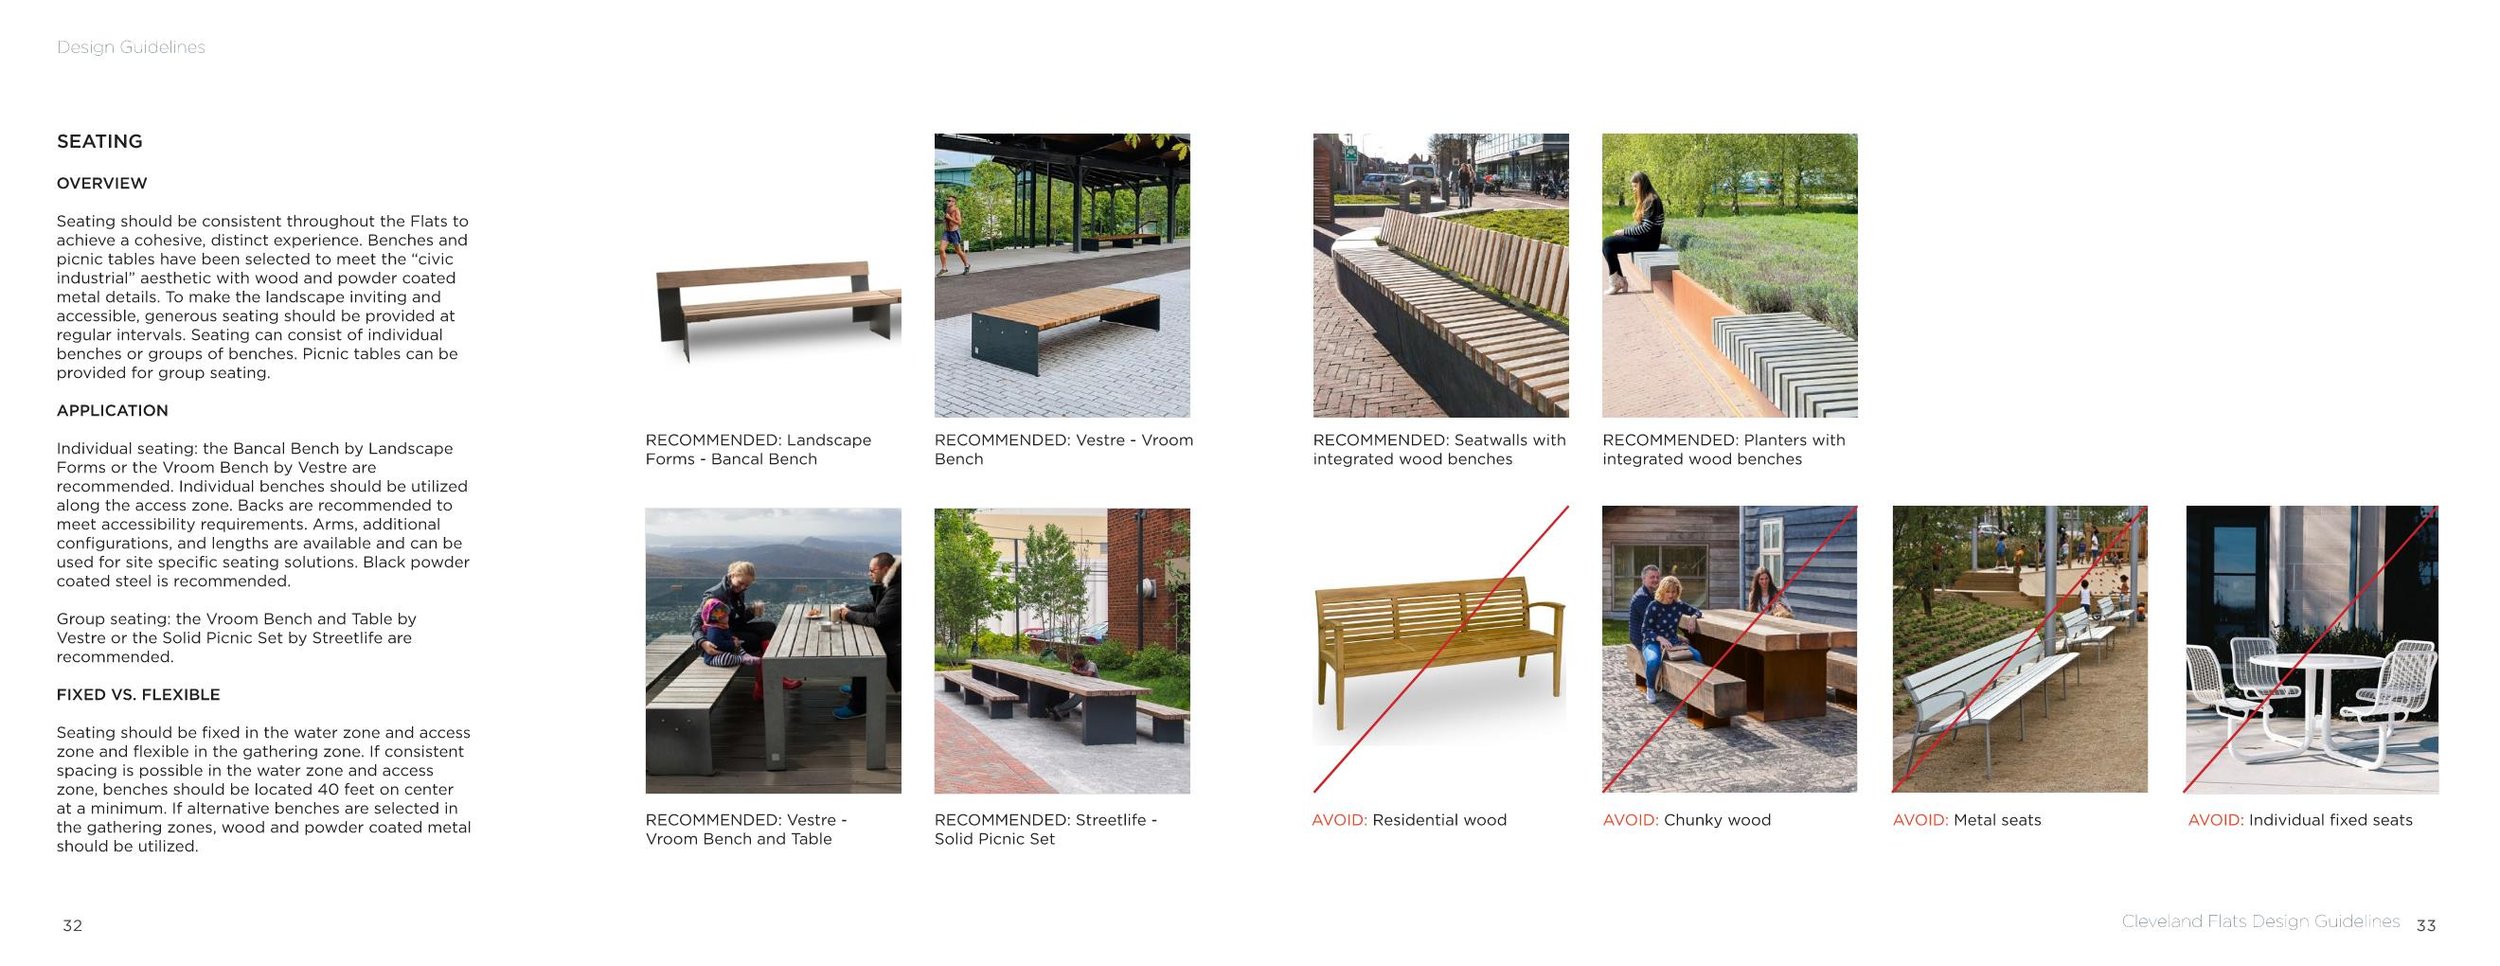 Cleveland Flats Guidelines_Seating.jpg